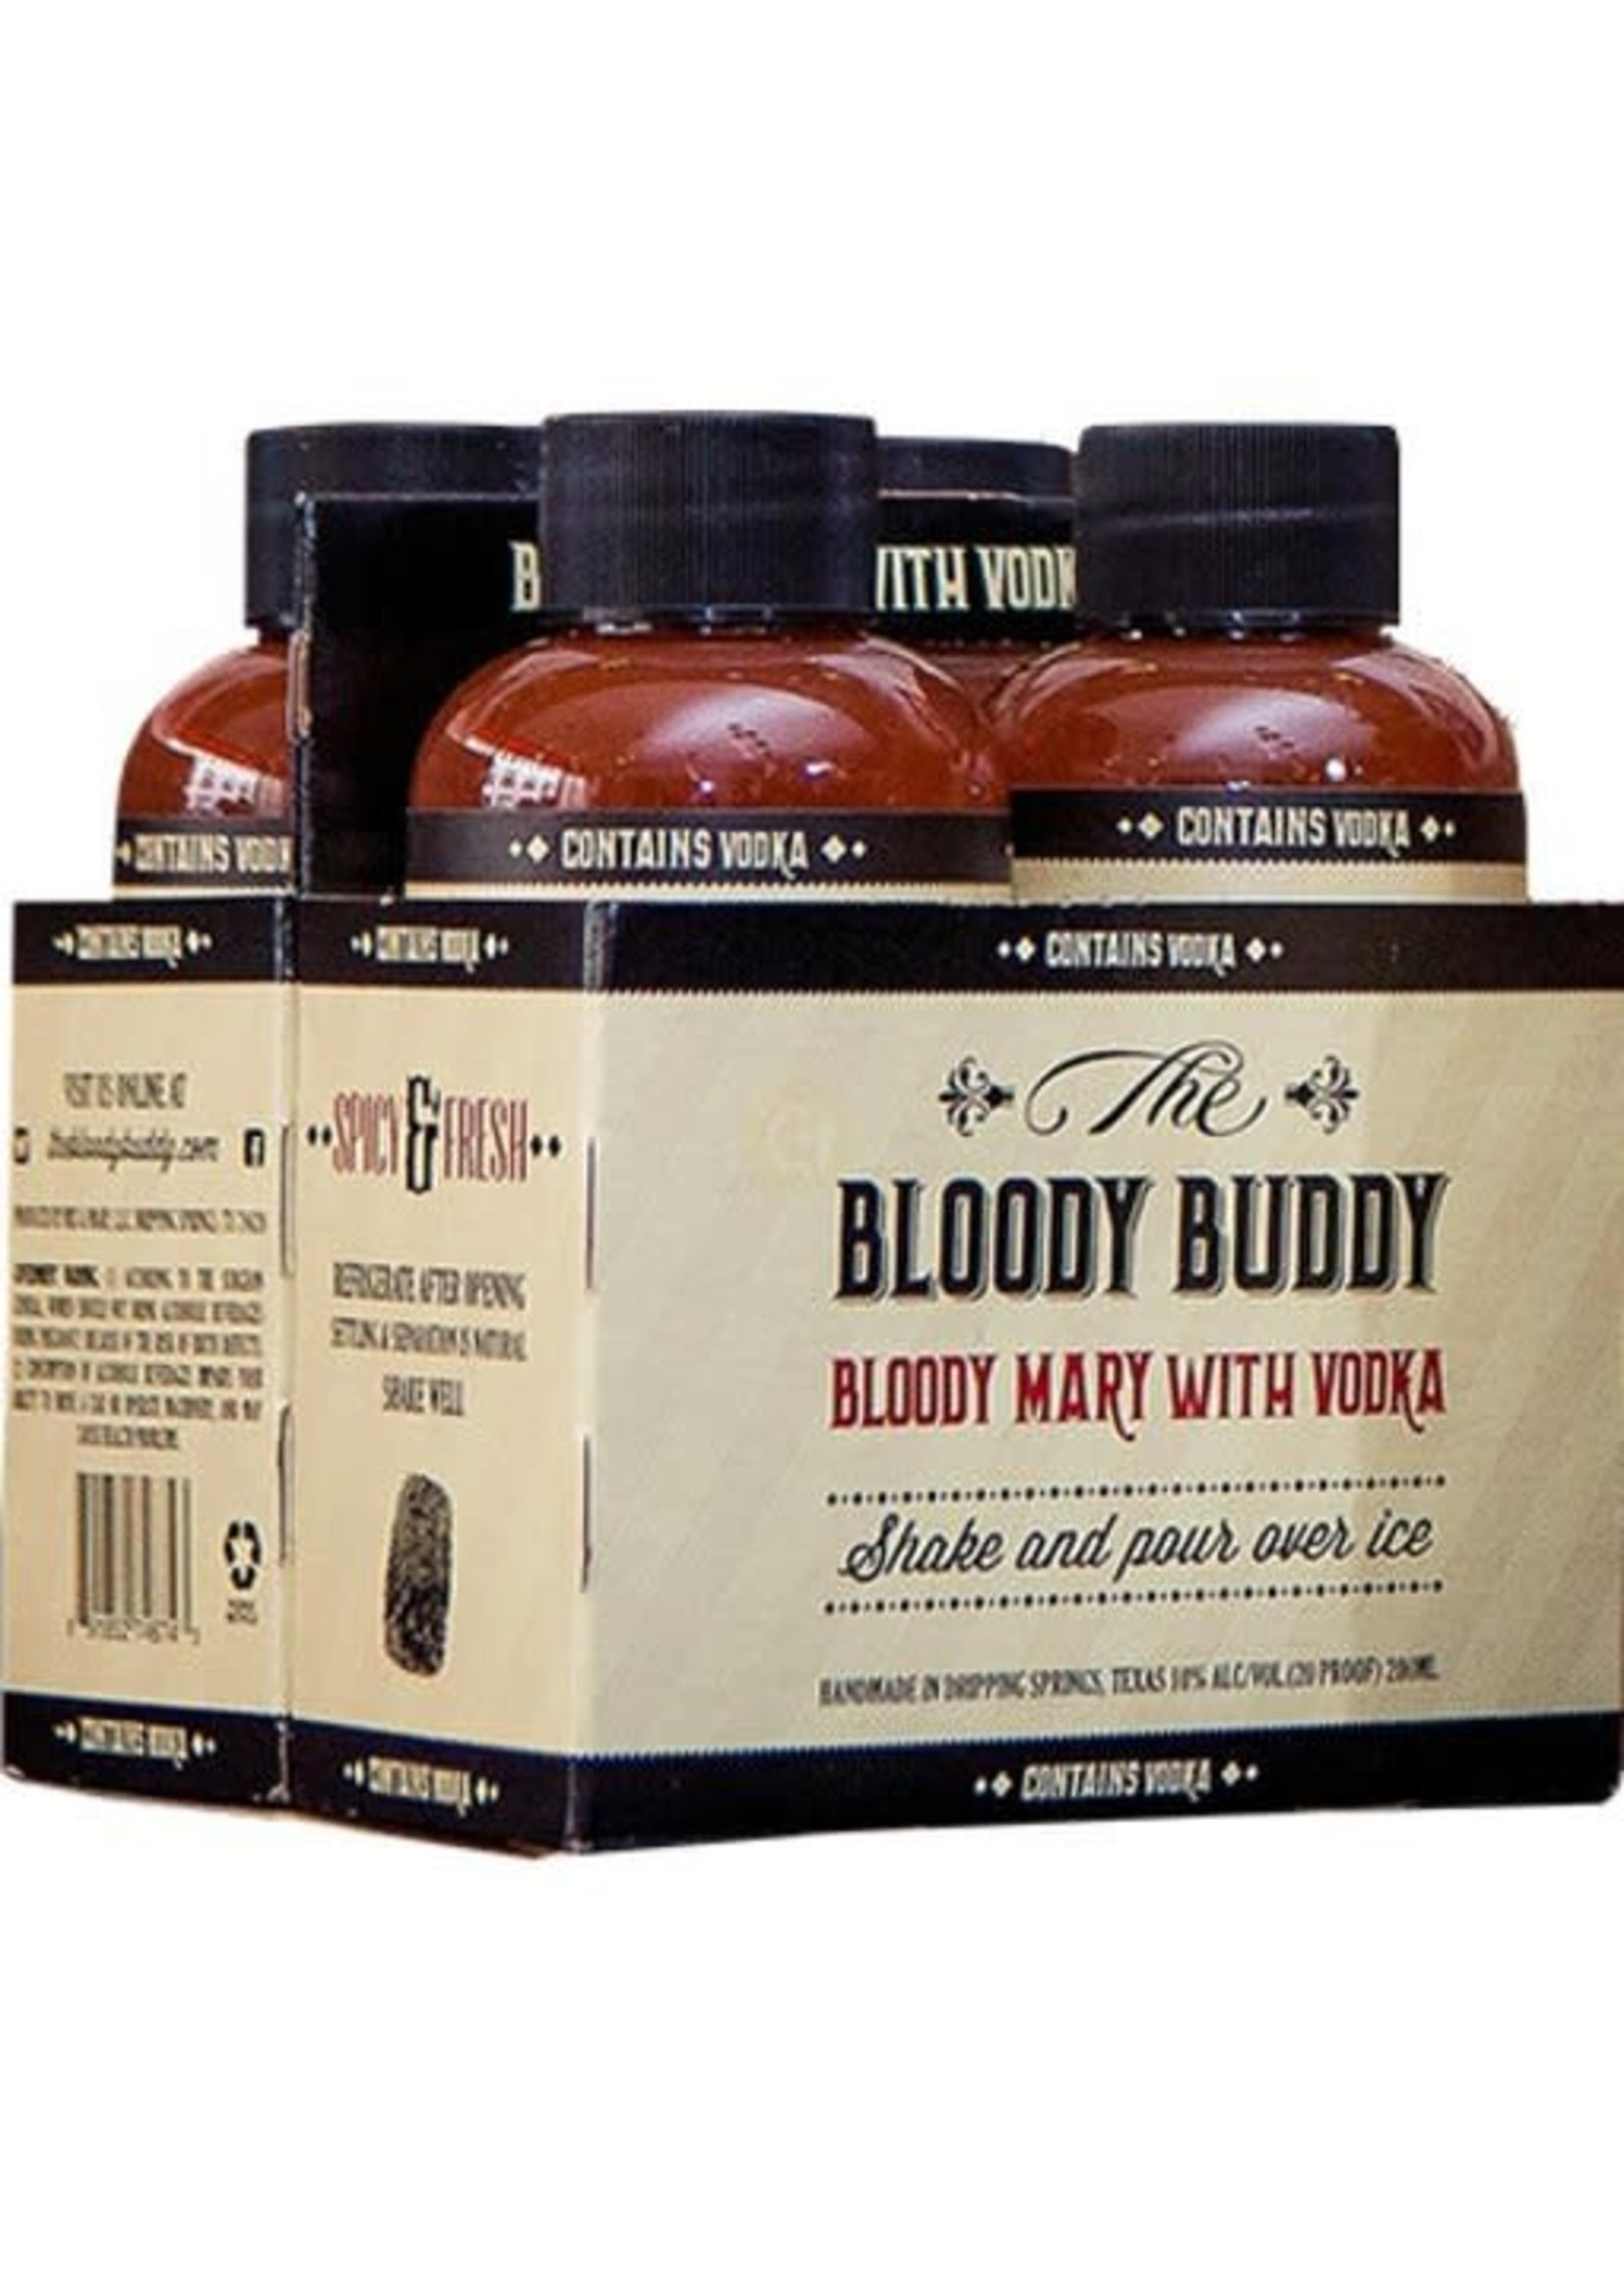 Bloody Buddy Bloody Marry With Vodka 20Proof 4pk 200ml Pet Bottles